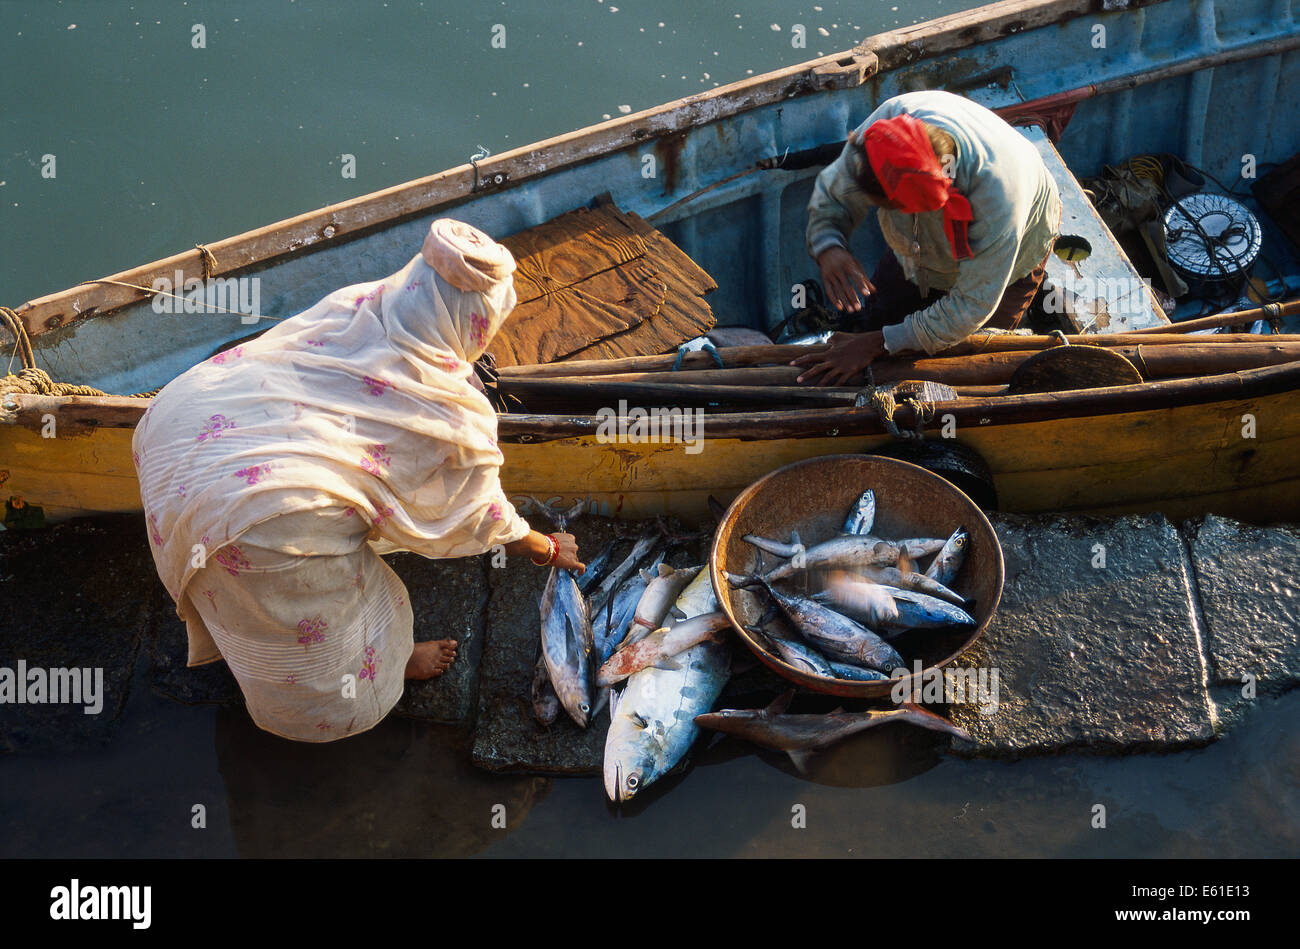 Boat unloading fishes in the port. The woman on the left is collecting the fishes to sell them to the market ( India) Stock Photo